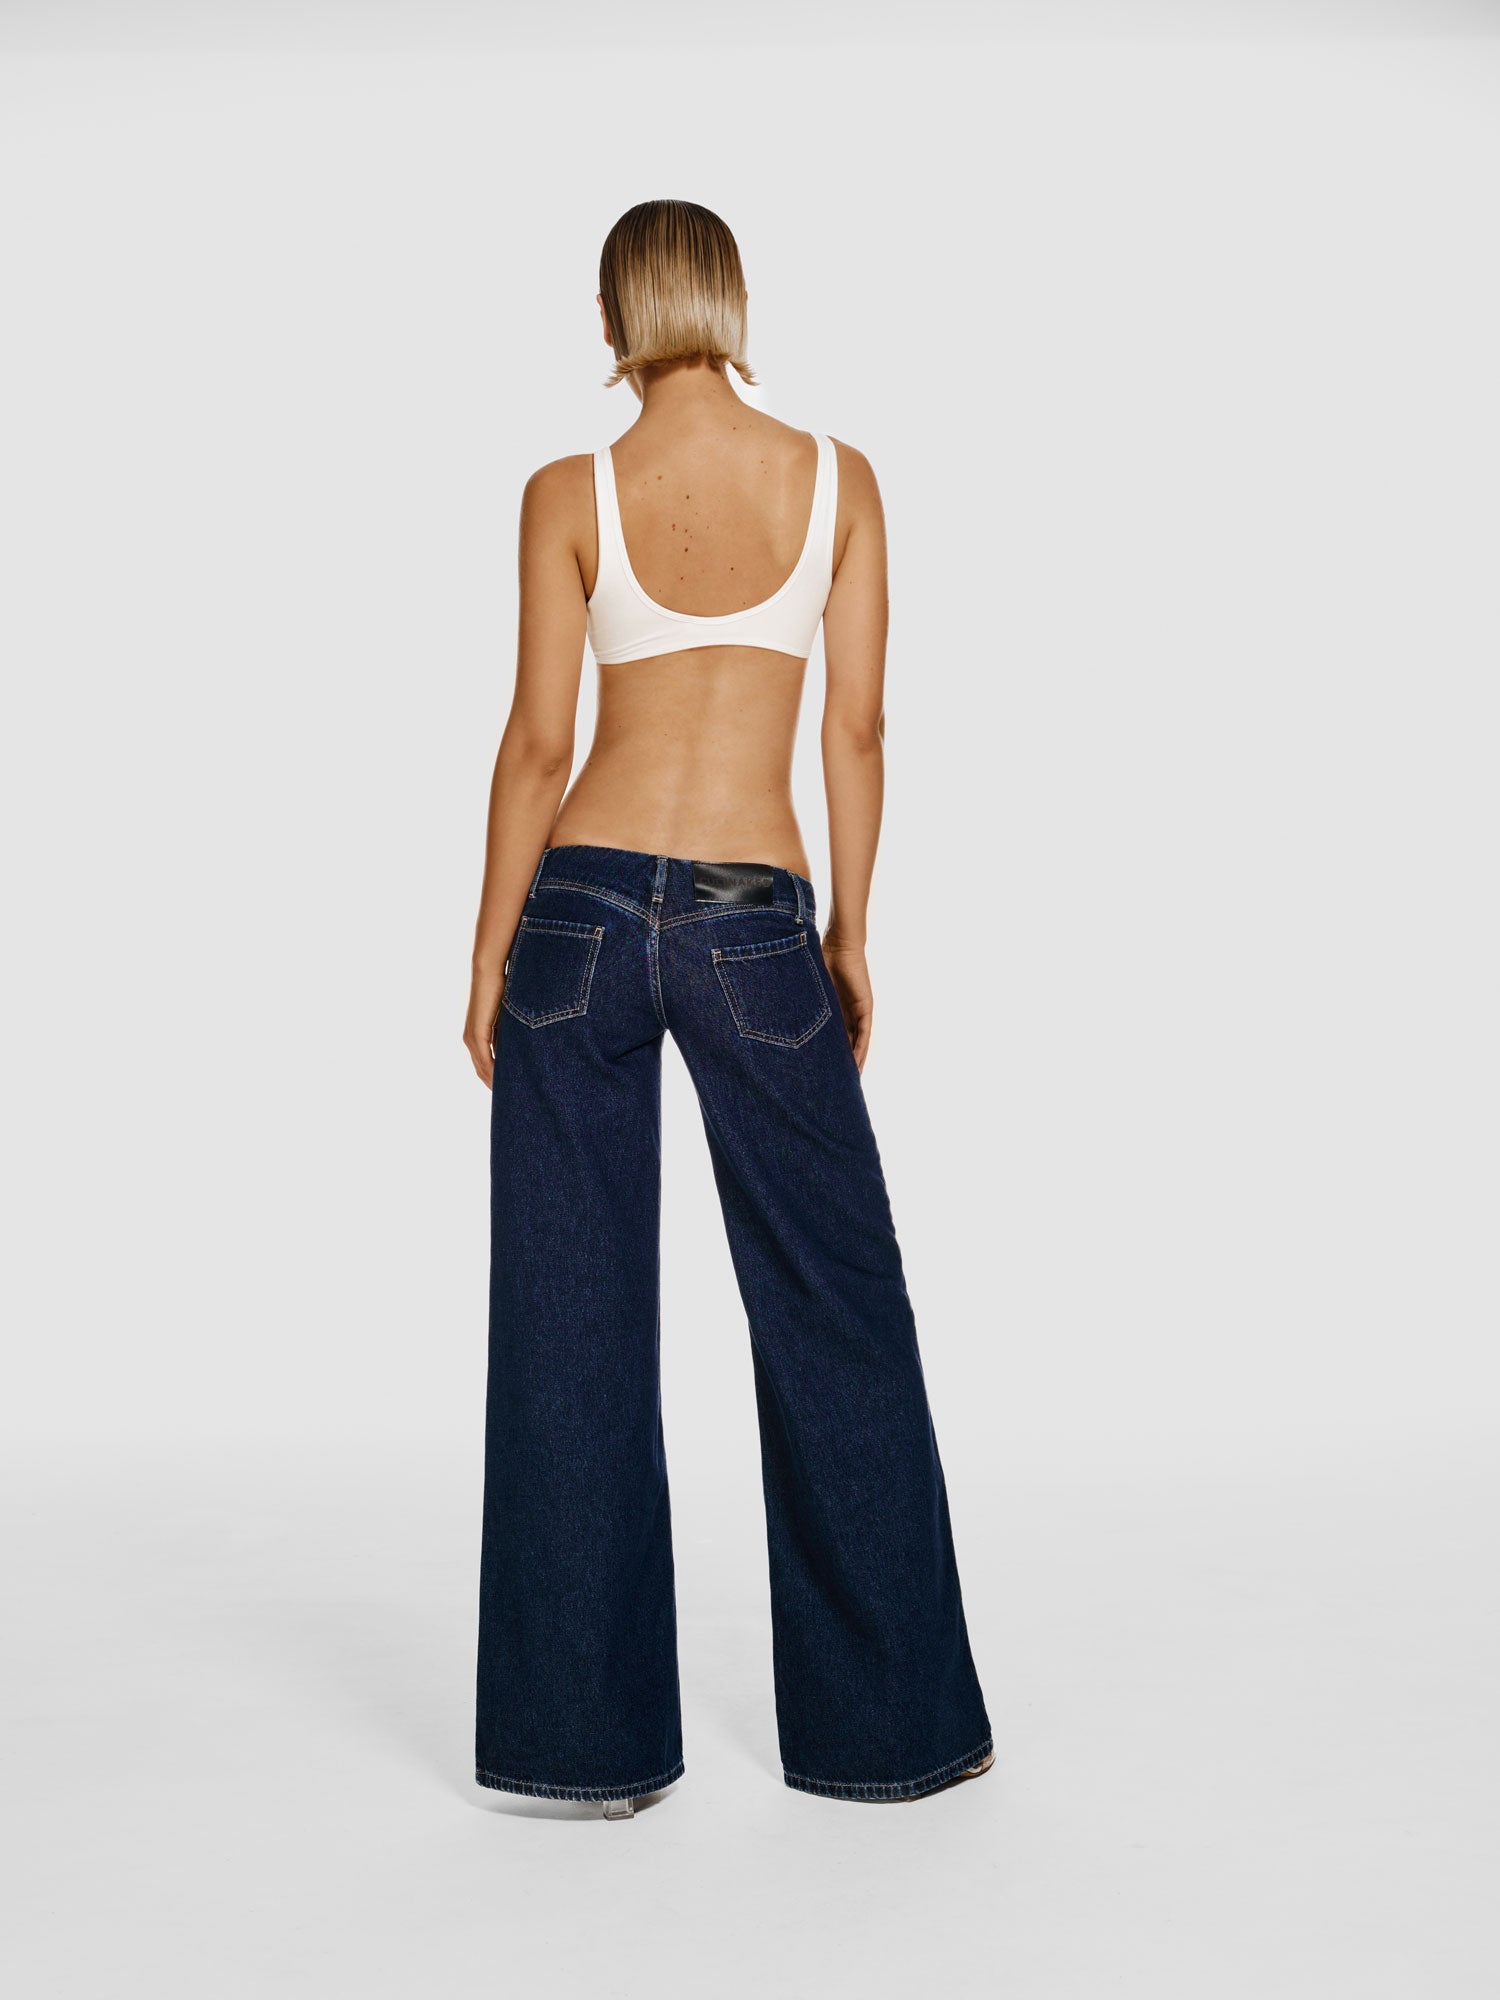 Patou | Trousers & skirts, quality & chic jeans for women - Patou.com